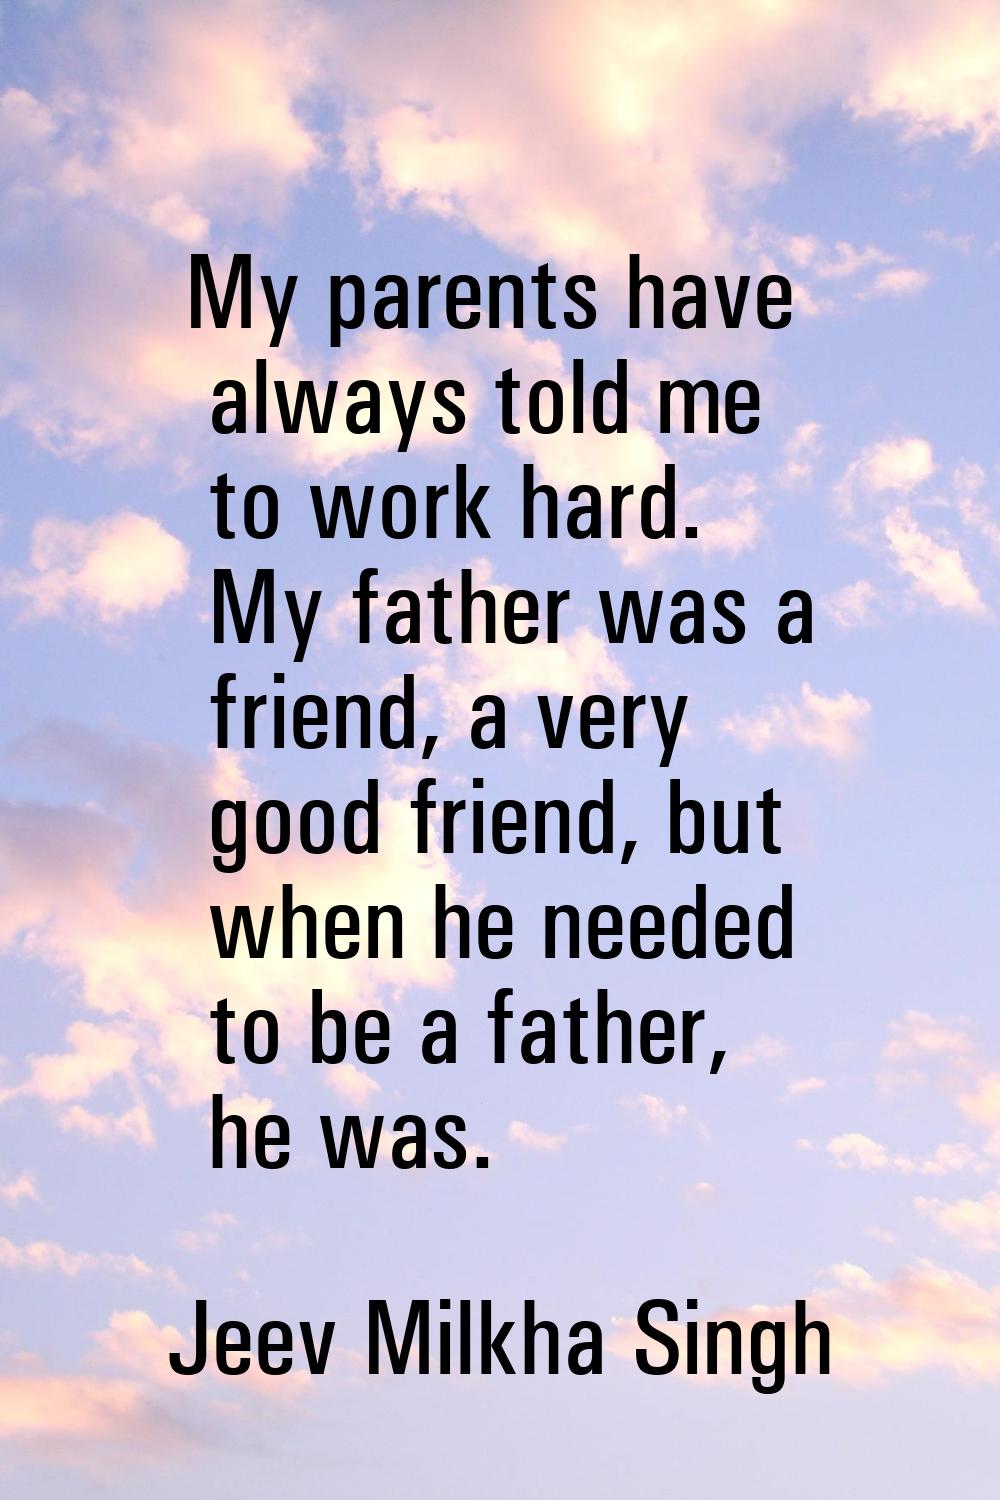 My parents have always told me to work hard. My father was a friend, a very good friend, but when h